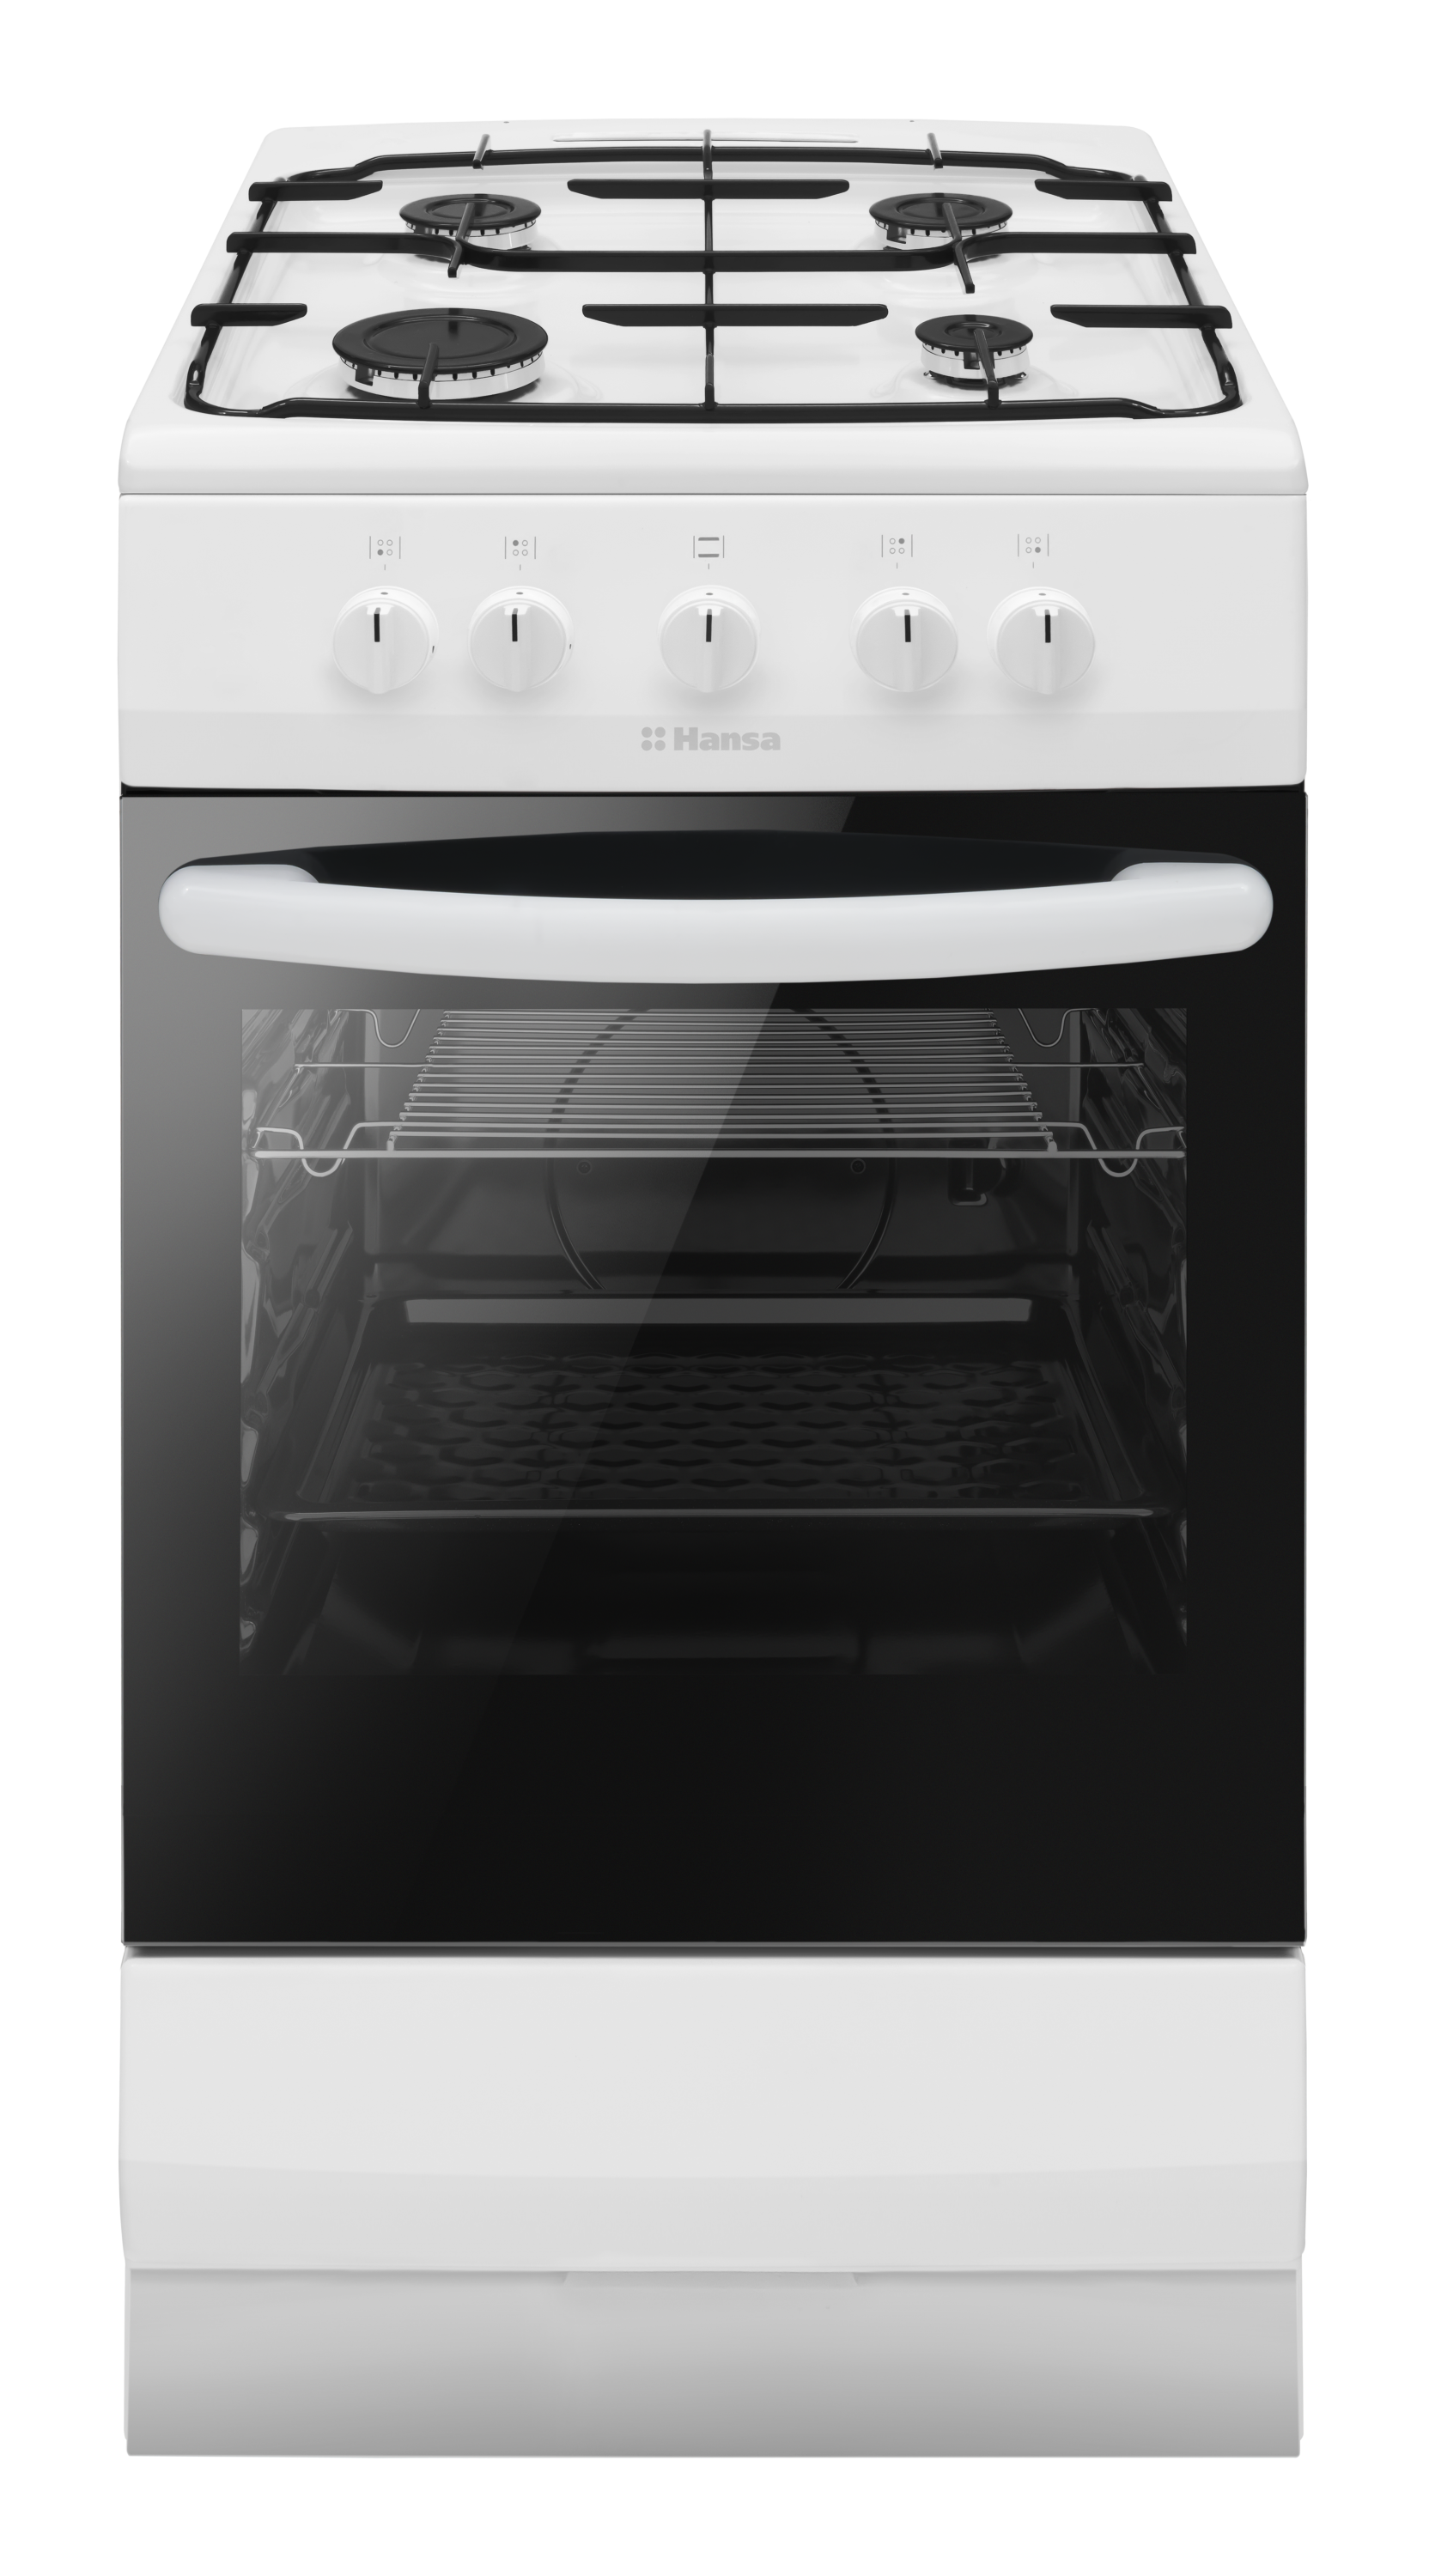 Freestanding cooker with gas hob